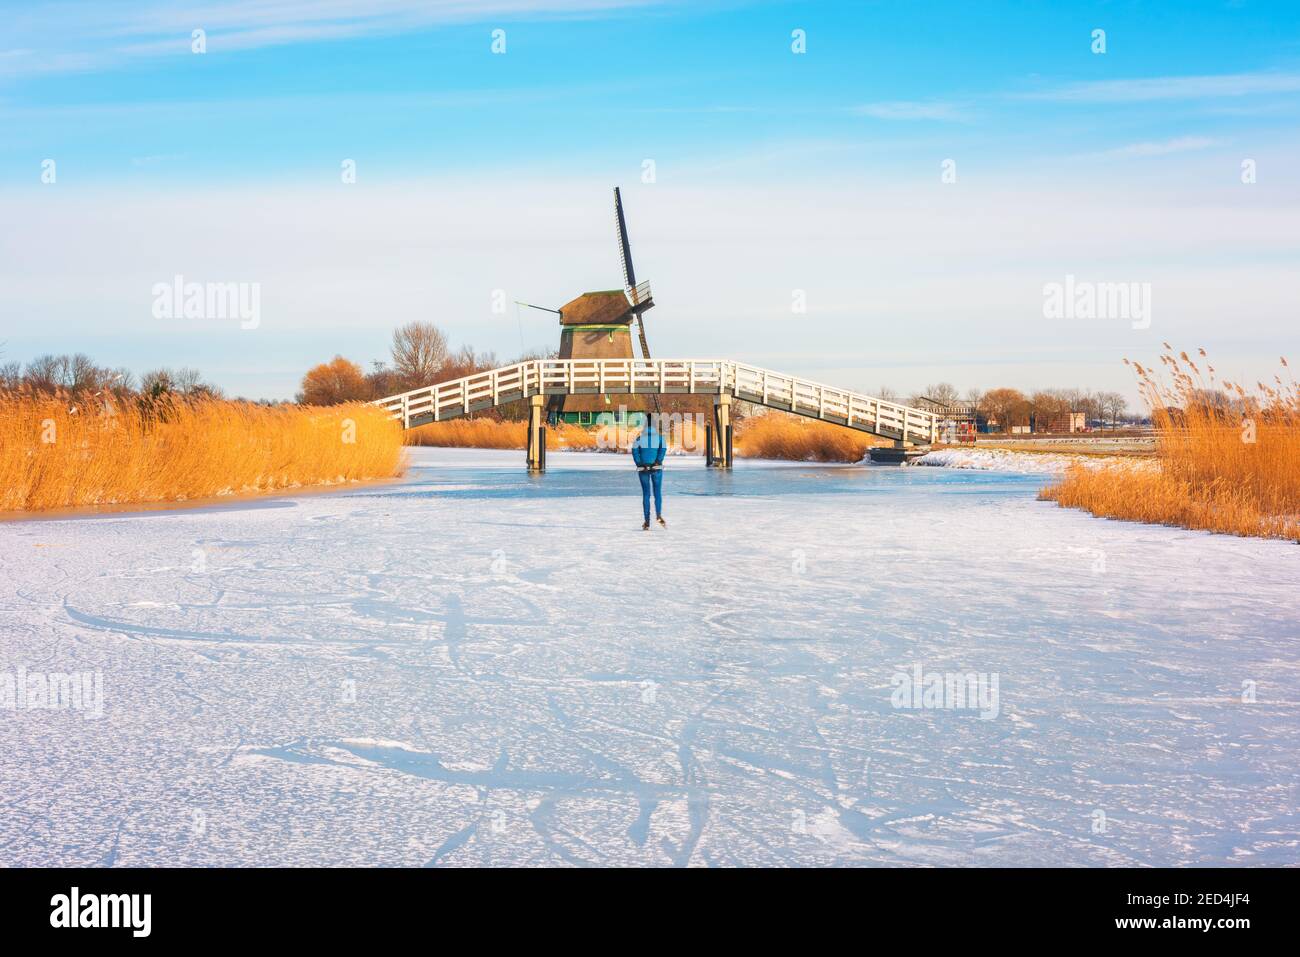 Lone Ice Skater skating on a frozen polder ditch in Obdam, Netherlands on a cold February day in 2021 Stock Photo